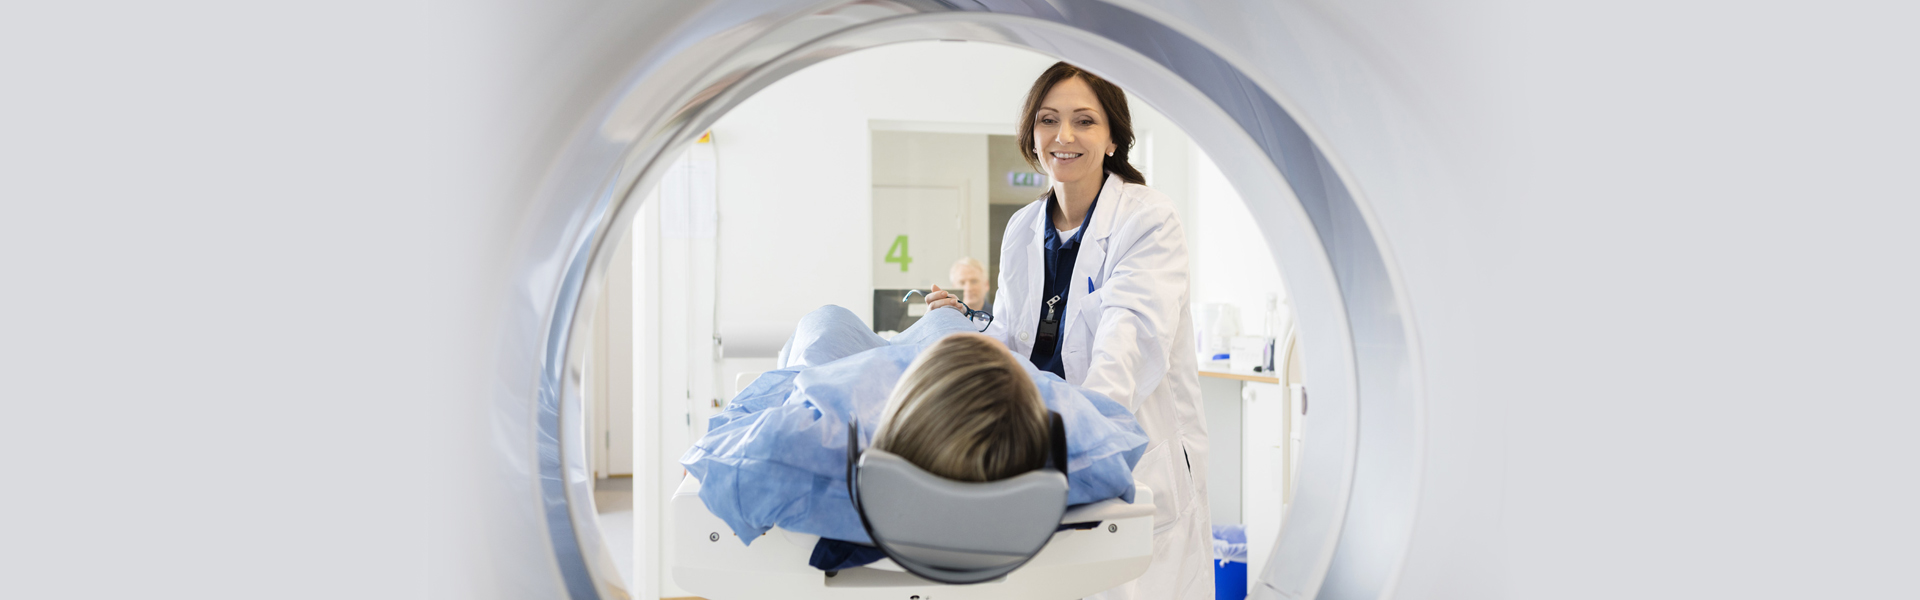 The Diverse Diagnostic Radiology and Laboratory Tests Conducted Within an Emergency Room